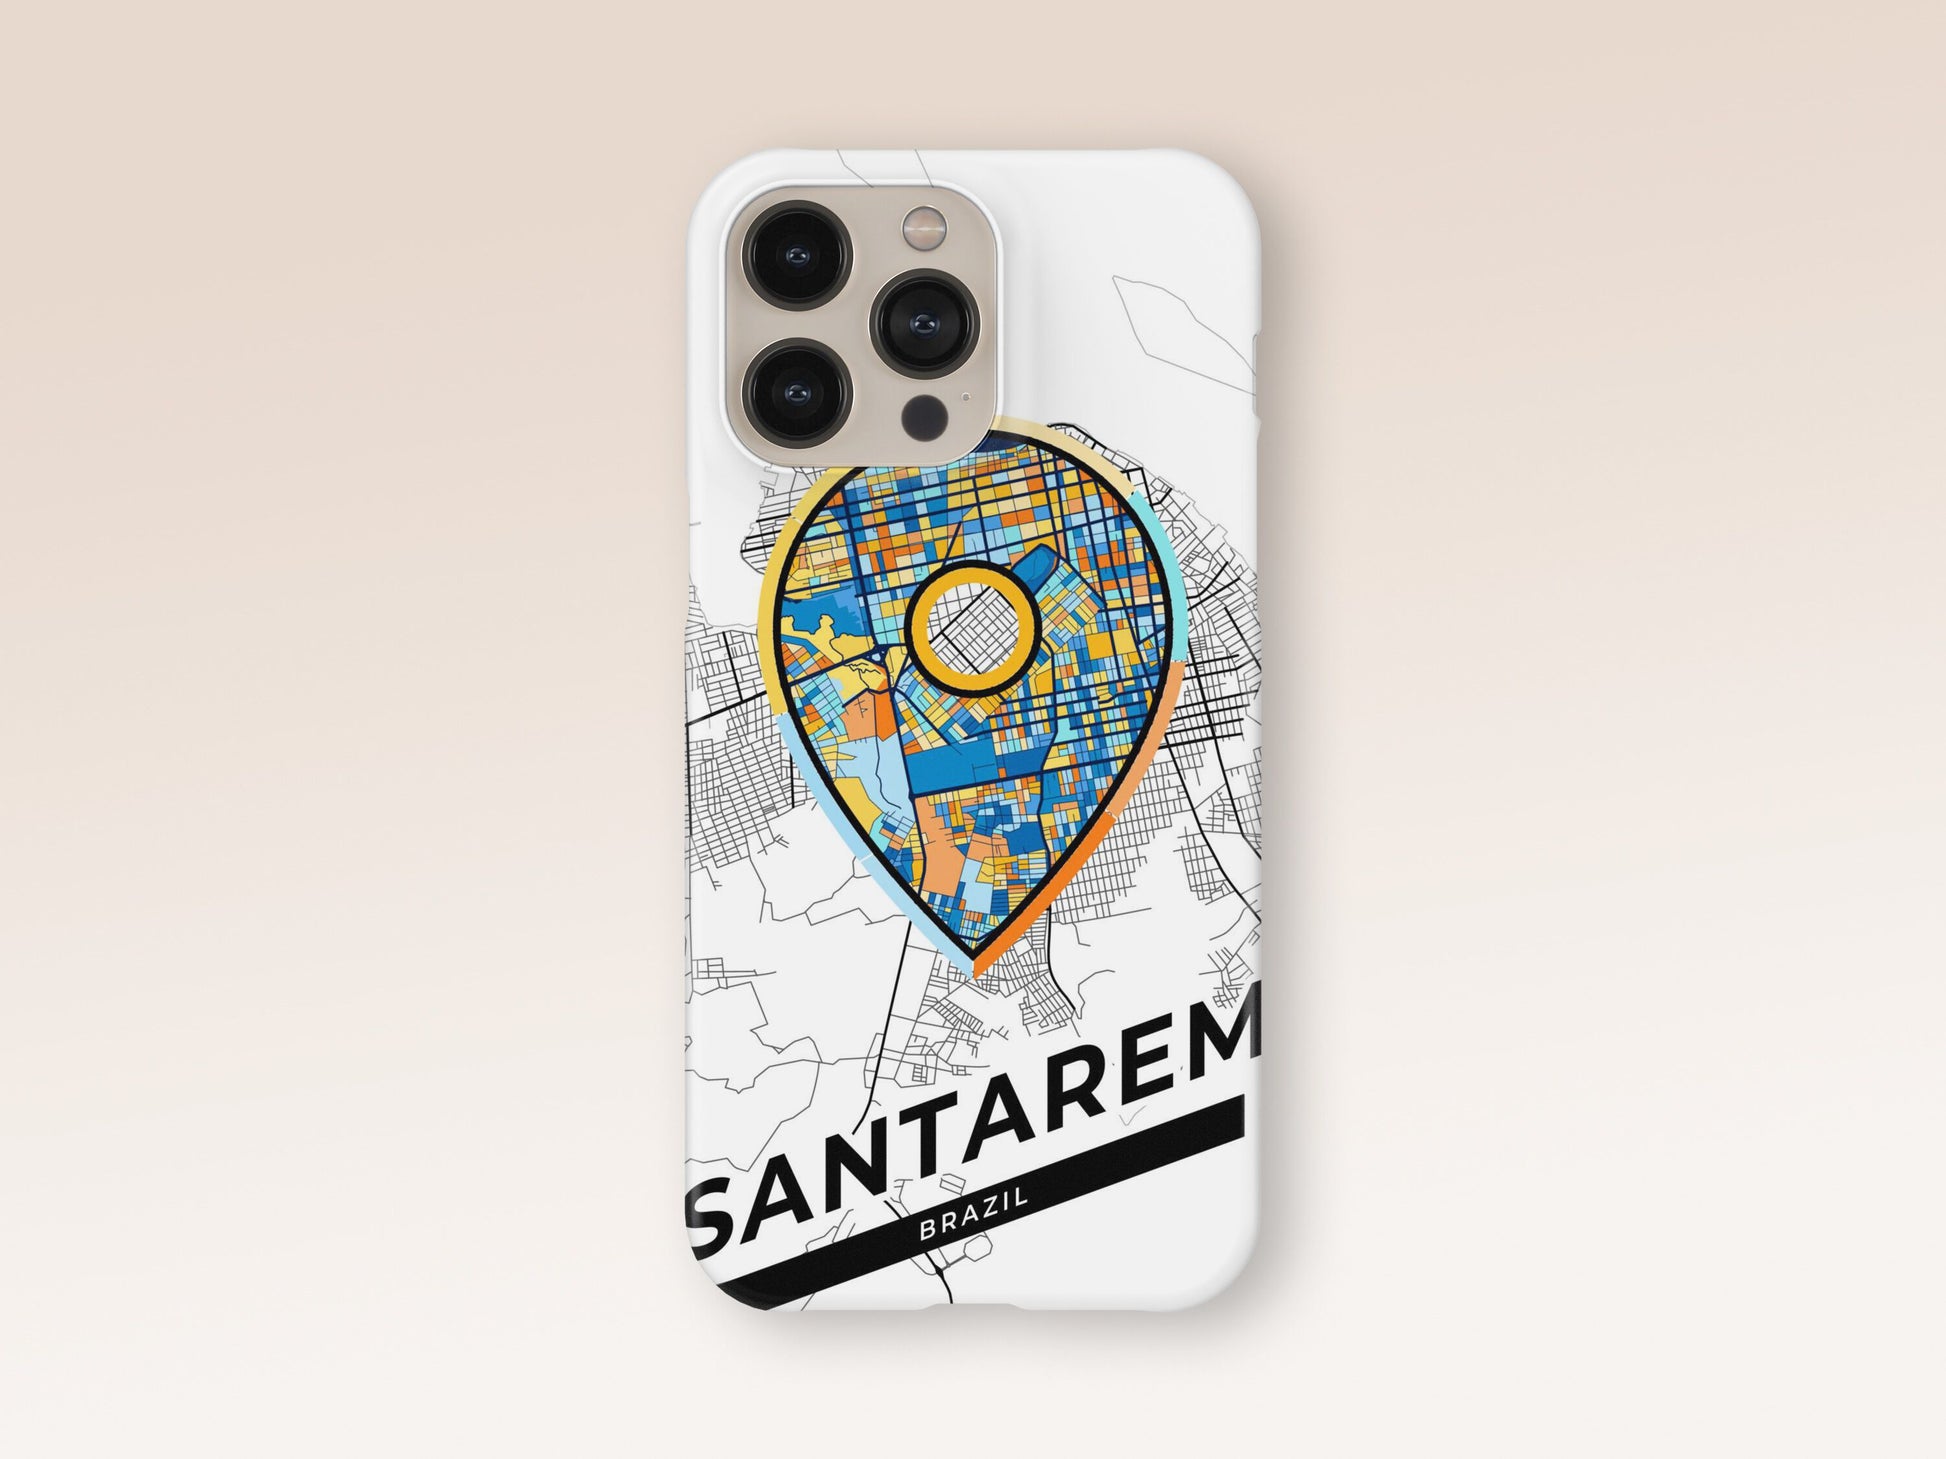 Santarem Brazil slim phone case with colorful icon. Birthday, wedding or housewarming gift. Couple match cases. 1